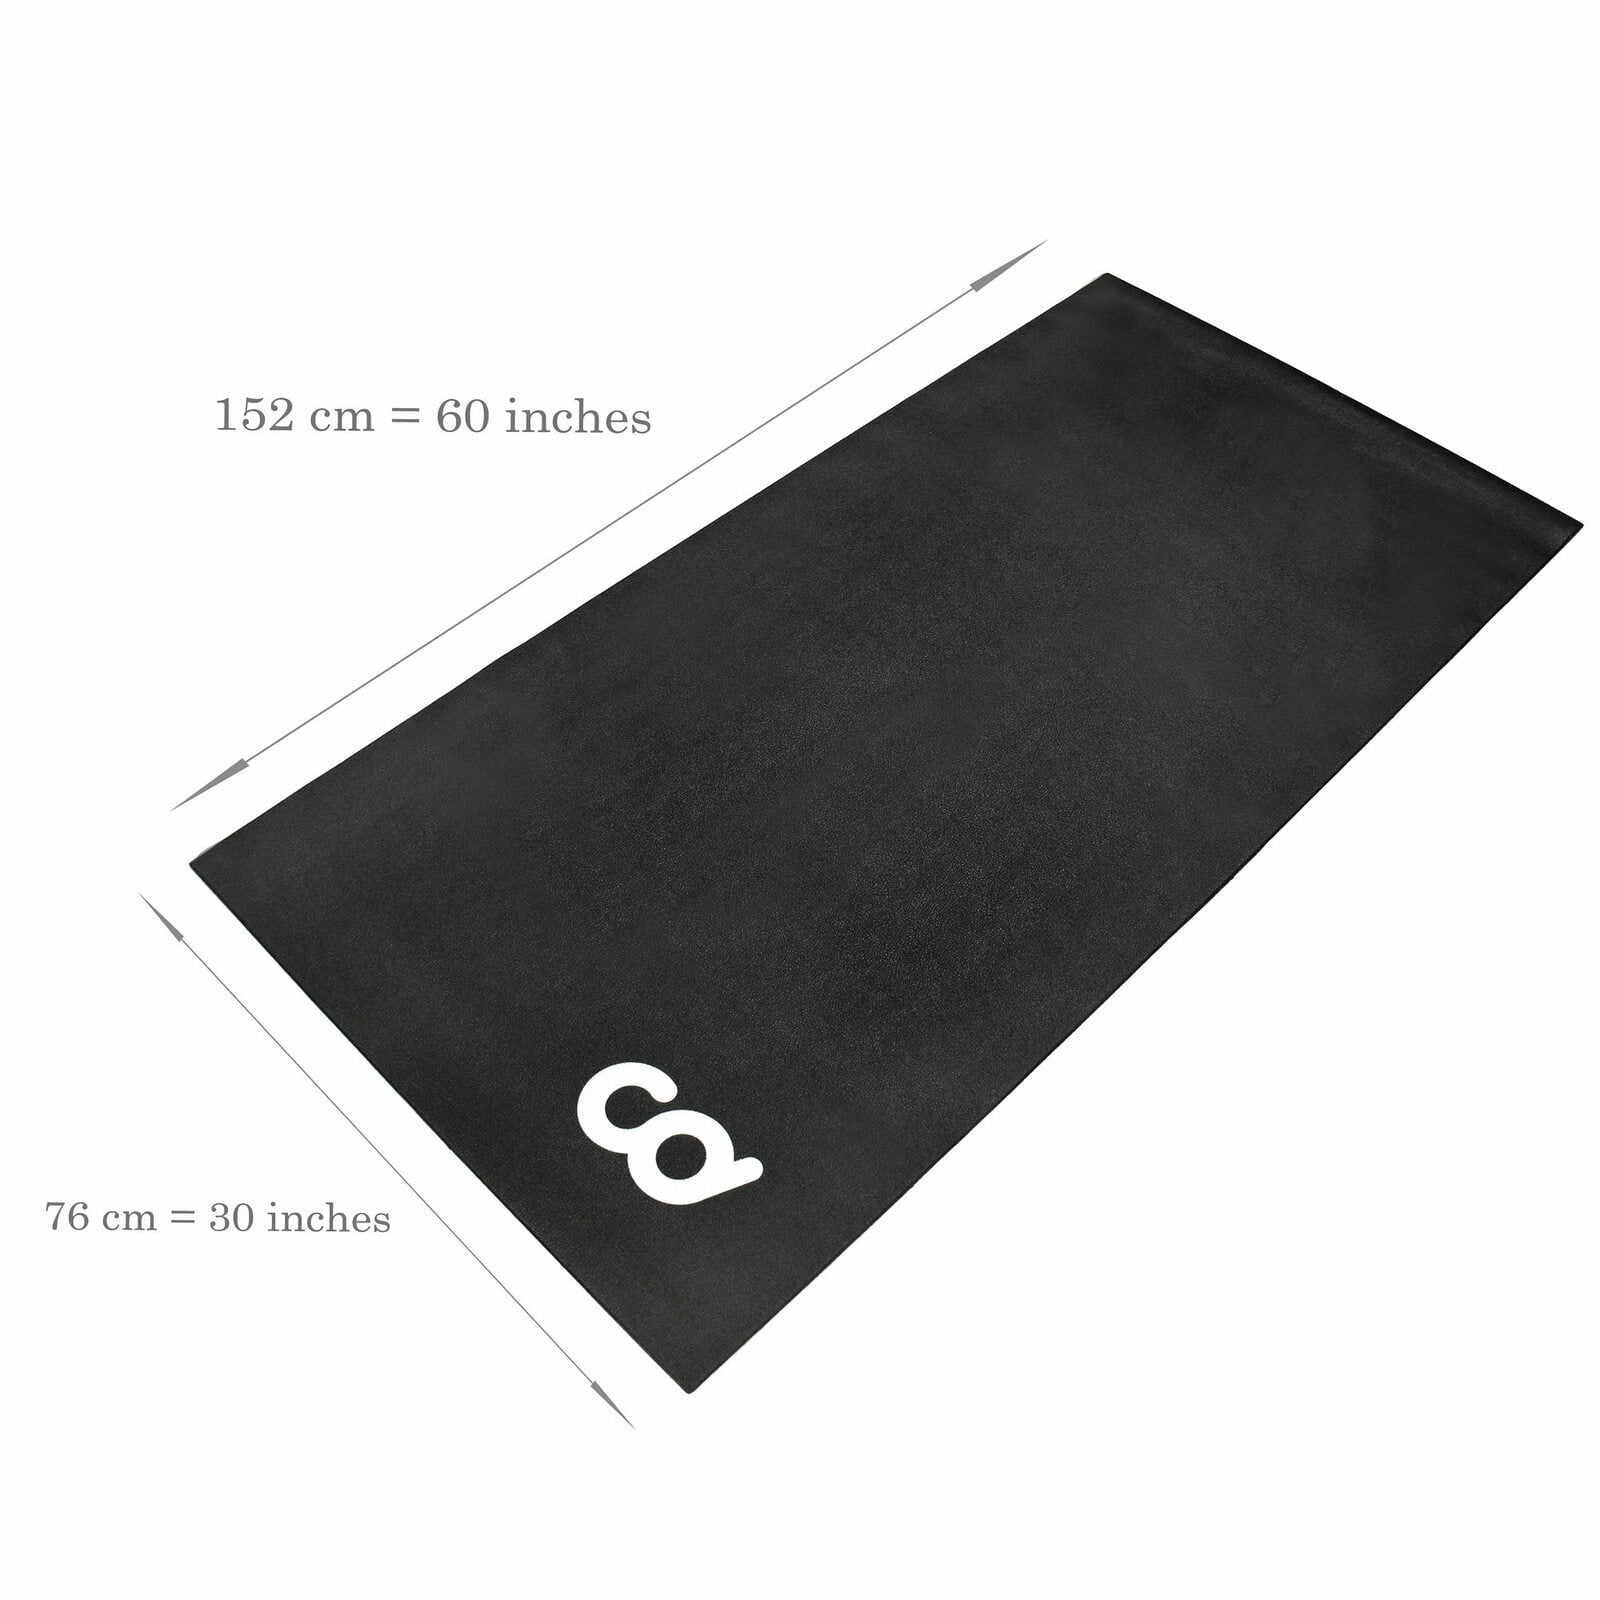  Saurka Bike Mat for Peloton Spinning Bike & Wahoo Kickr, PVC  Enviromental 30×60in 4mm Bicycle Trainer Mat for Stationary Indoor Spin  Bike, Exercise Cycling Mat : Sports & Outdoors